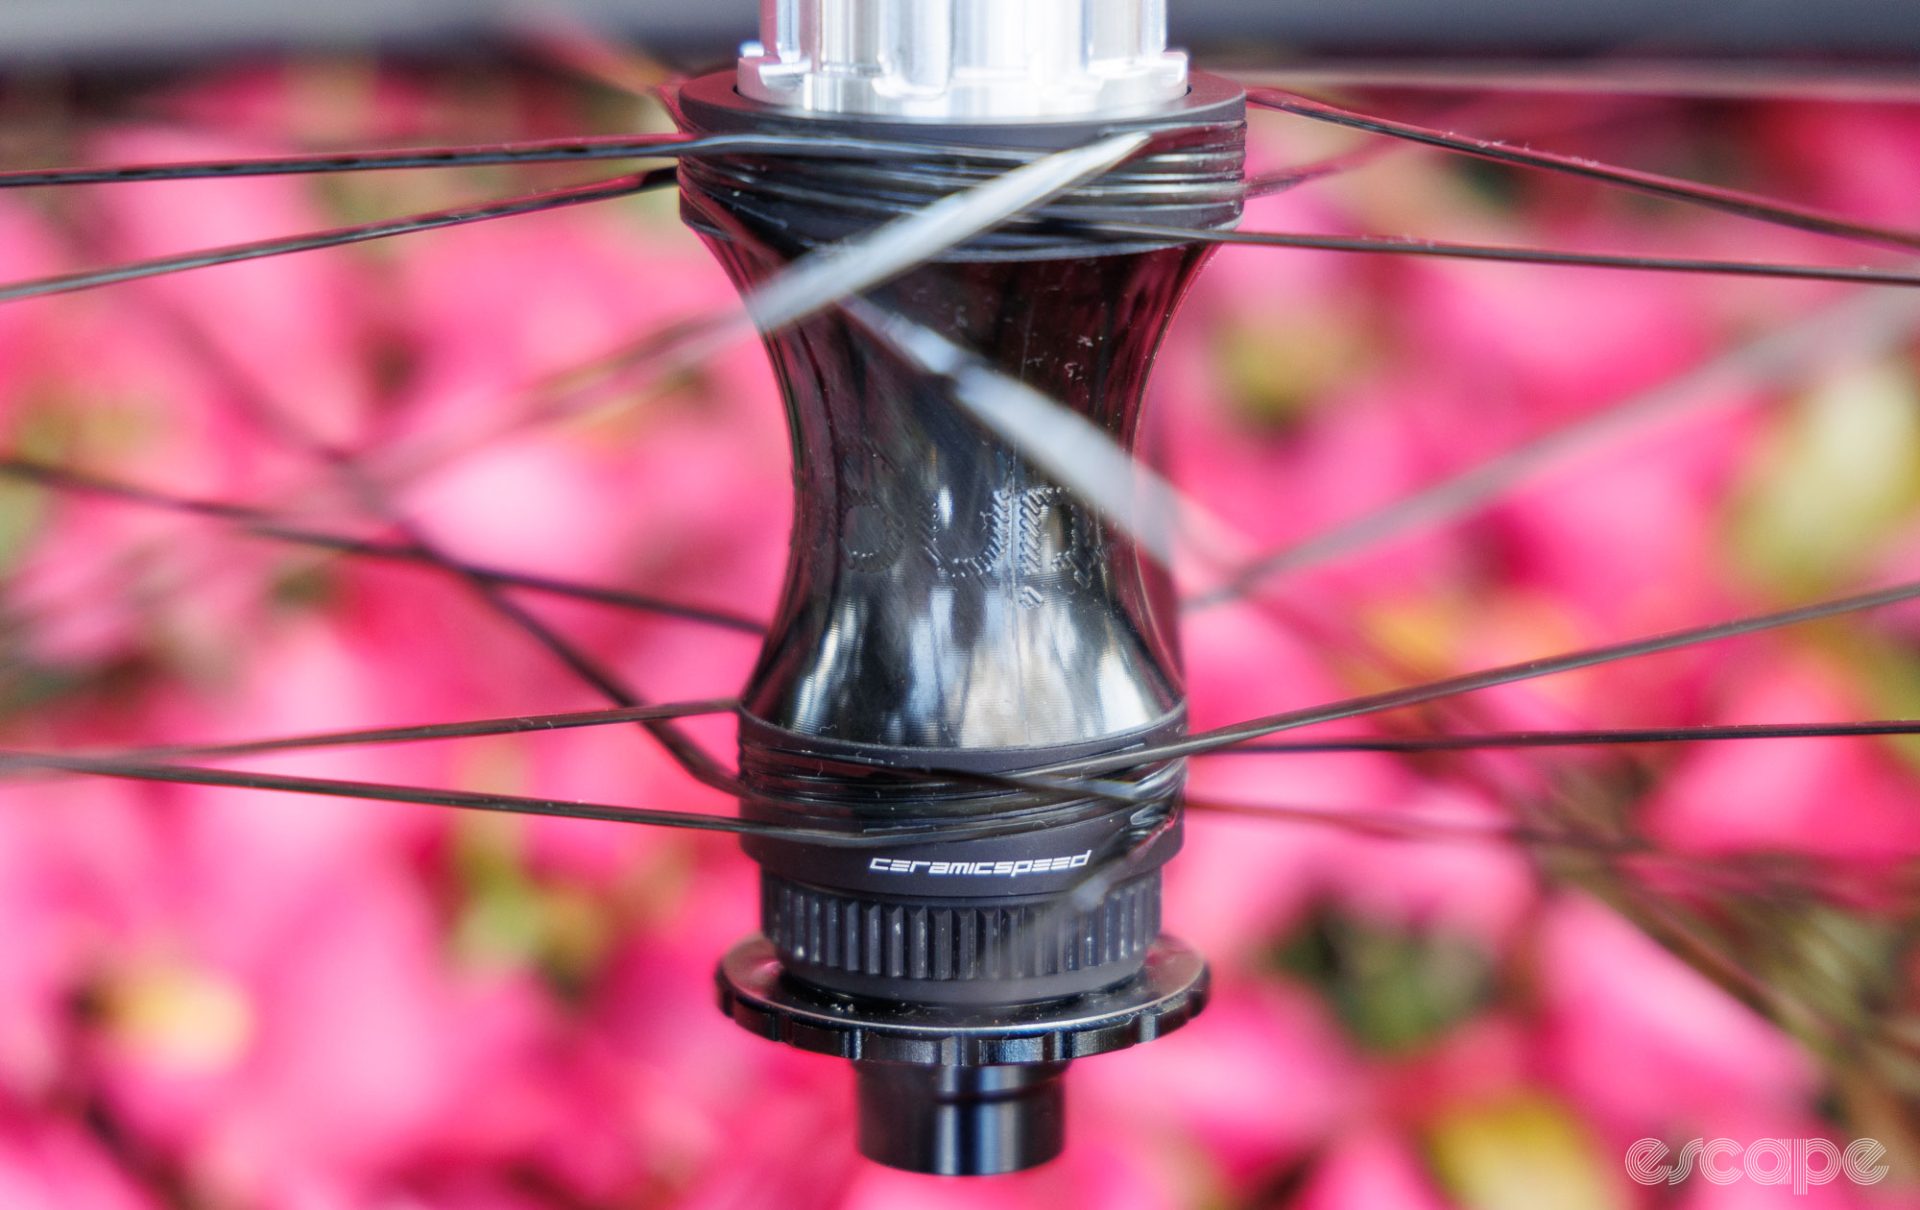 A close up of the Partington MKII rear hub, showing the hub finish and CeramicSpeed logo. 